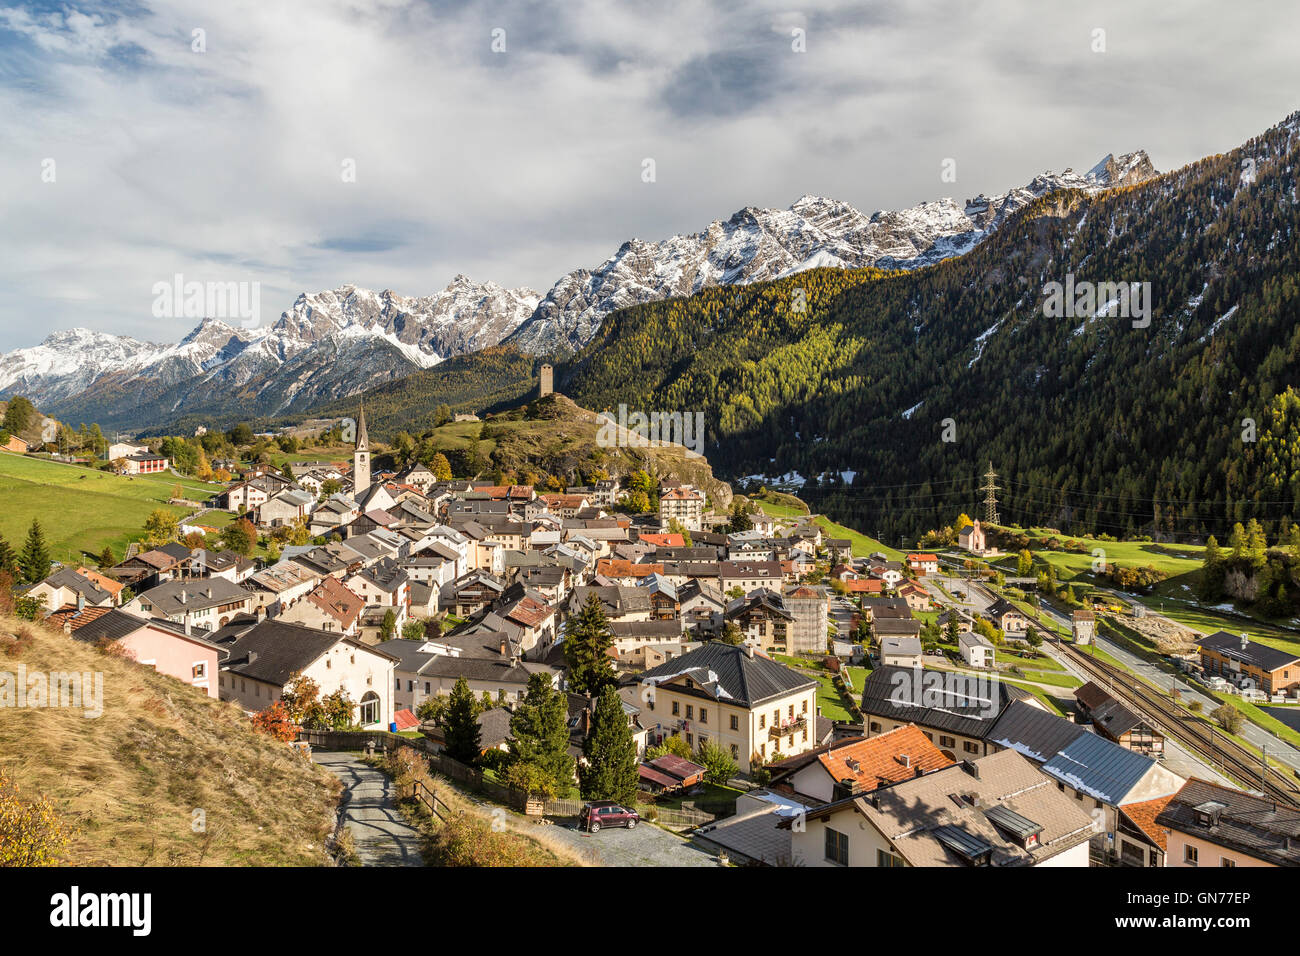 View of Ardez village surrounded by woods and snowy peaks Lower Engadine Canton of Graubünden Switzerland Europe Stock Photo